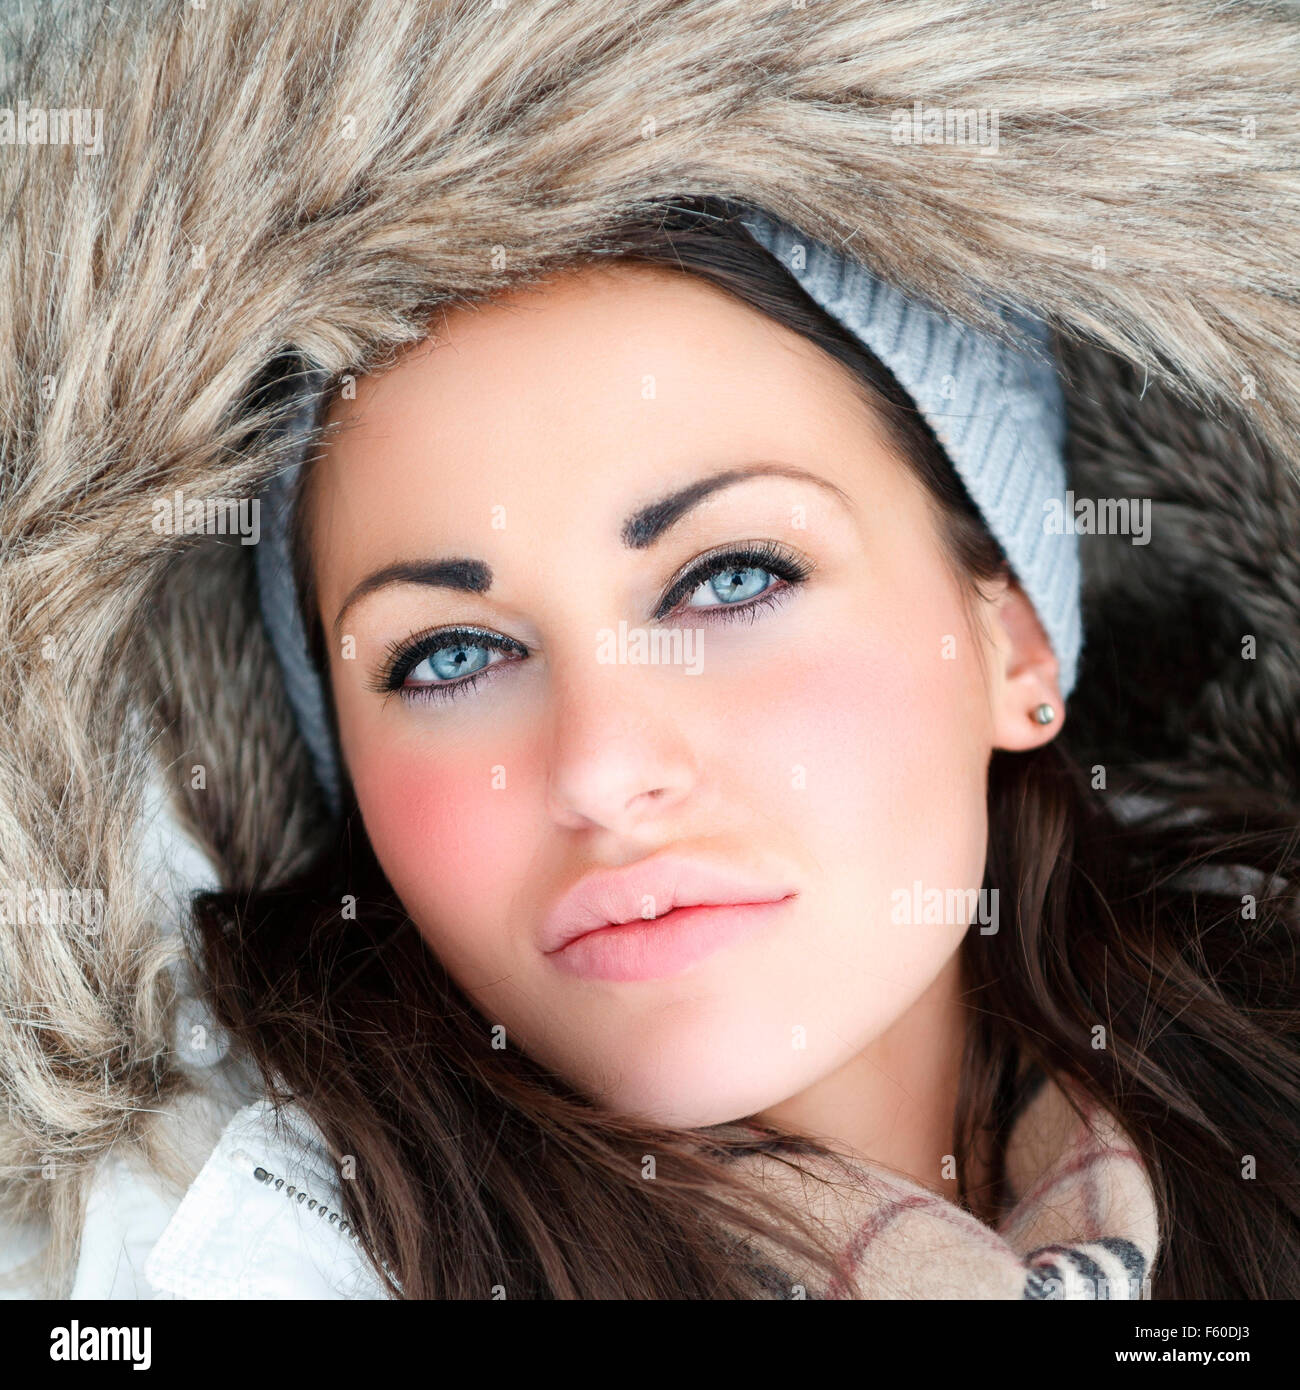 Outdoor beauty portrait of beautiful attractive young woman in warm fur lined hooded winter coat or jacket  Model Release: Yes.  Property release: No. Stock Photo